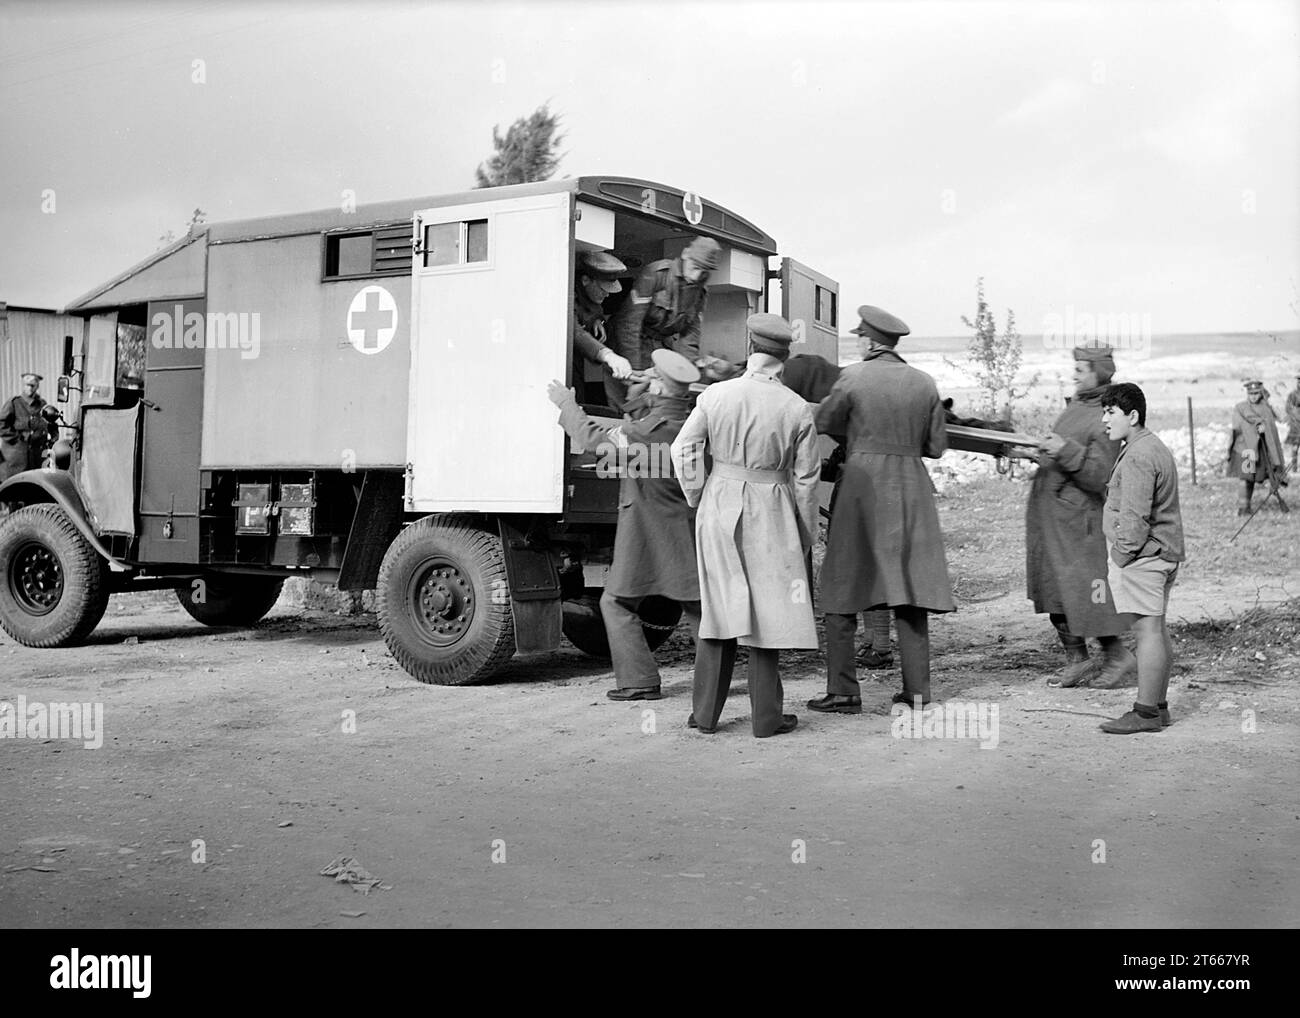 Italian prisoner of war on stretcher being  lifted into ambulance after detraining at Wadi al-Sarar Railway Station, Mandatory Palestine, G. Eric and Edith Matson Photograph Collection, December 21, 1940 Stock Photo